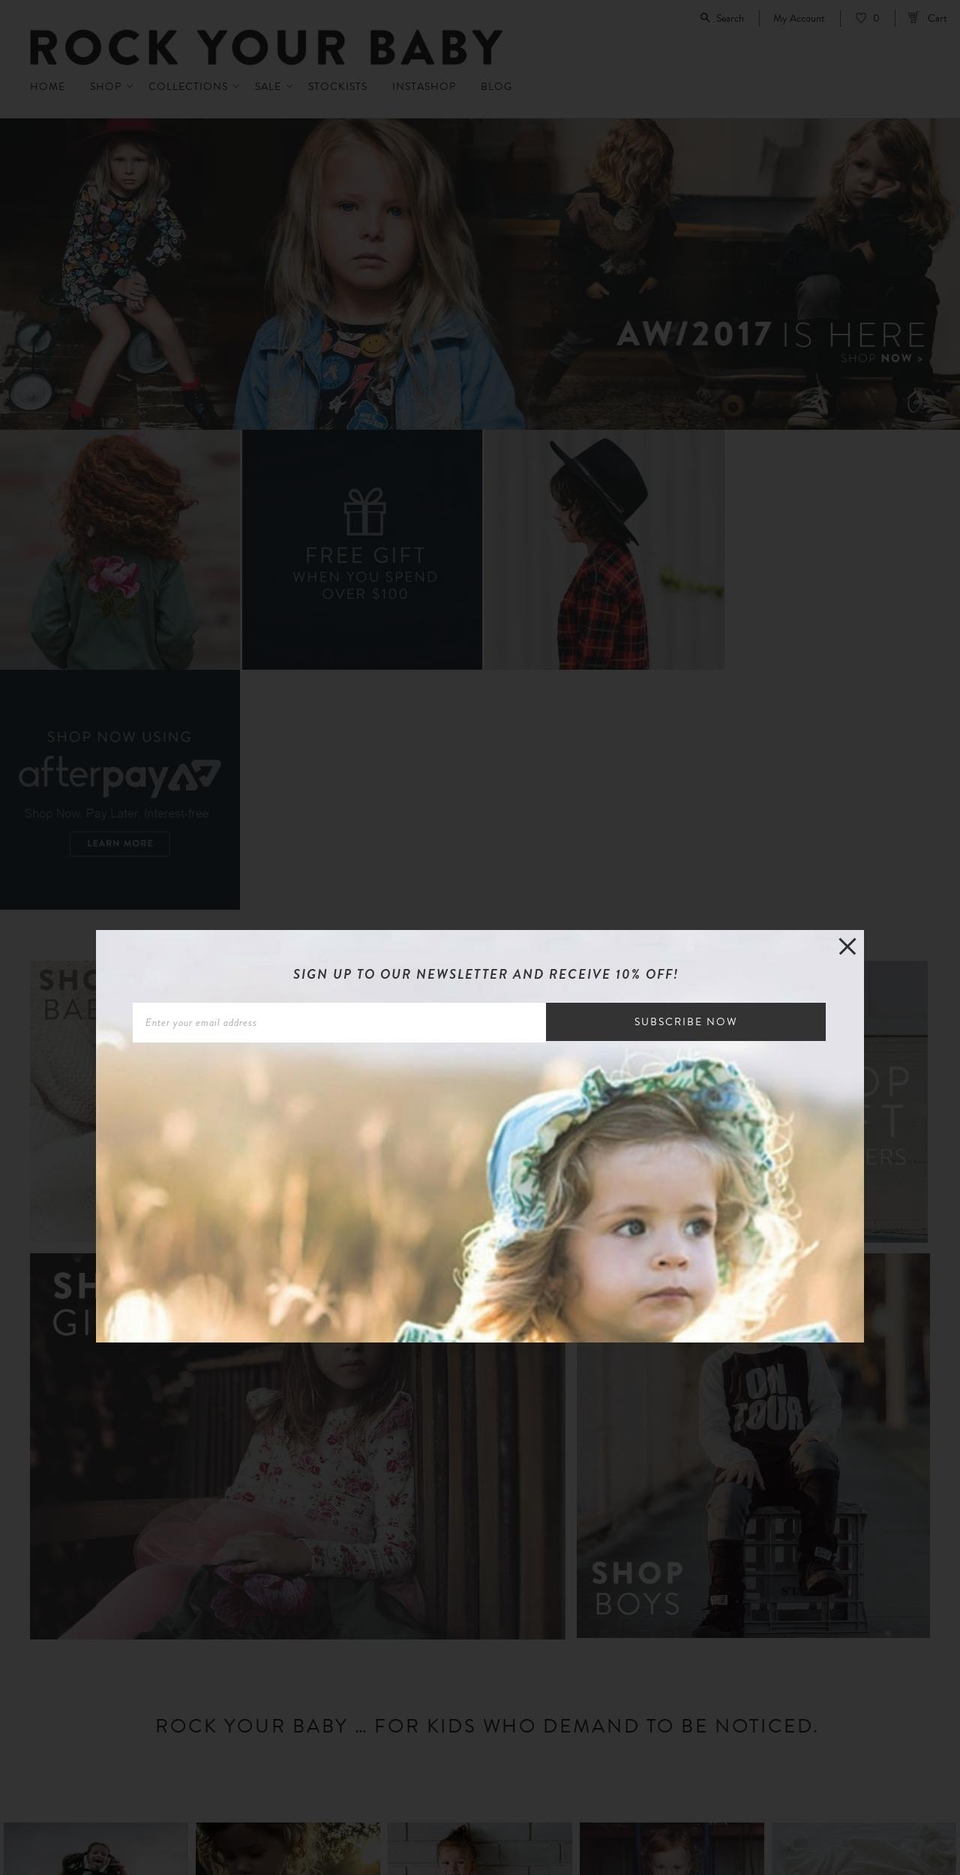 Production Shopify theme site example rockyourbaby.com